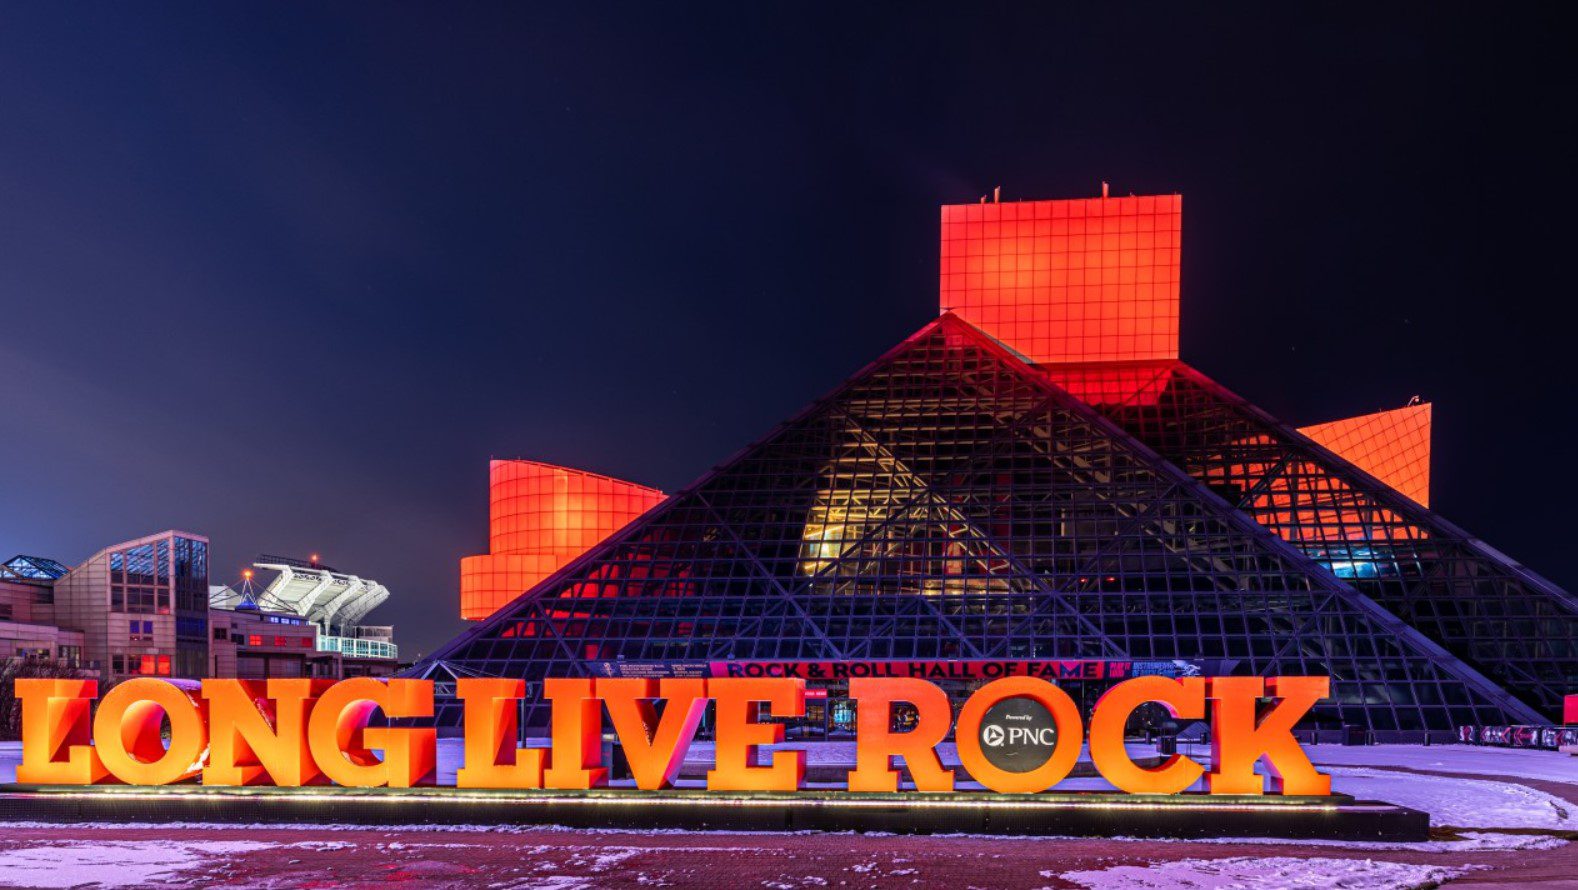 Rock & Roll Hall of Fame Music Museum in Cleveland Ohio